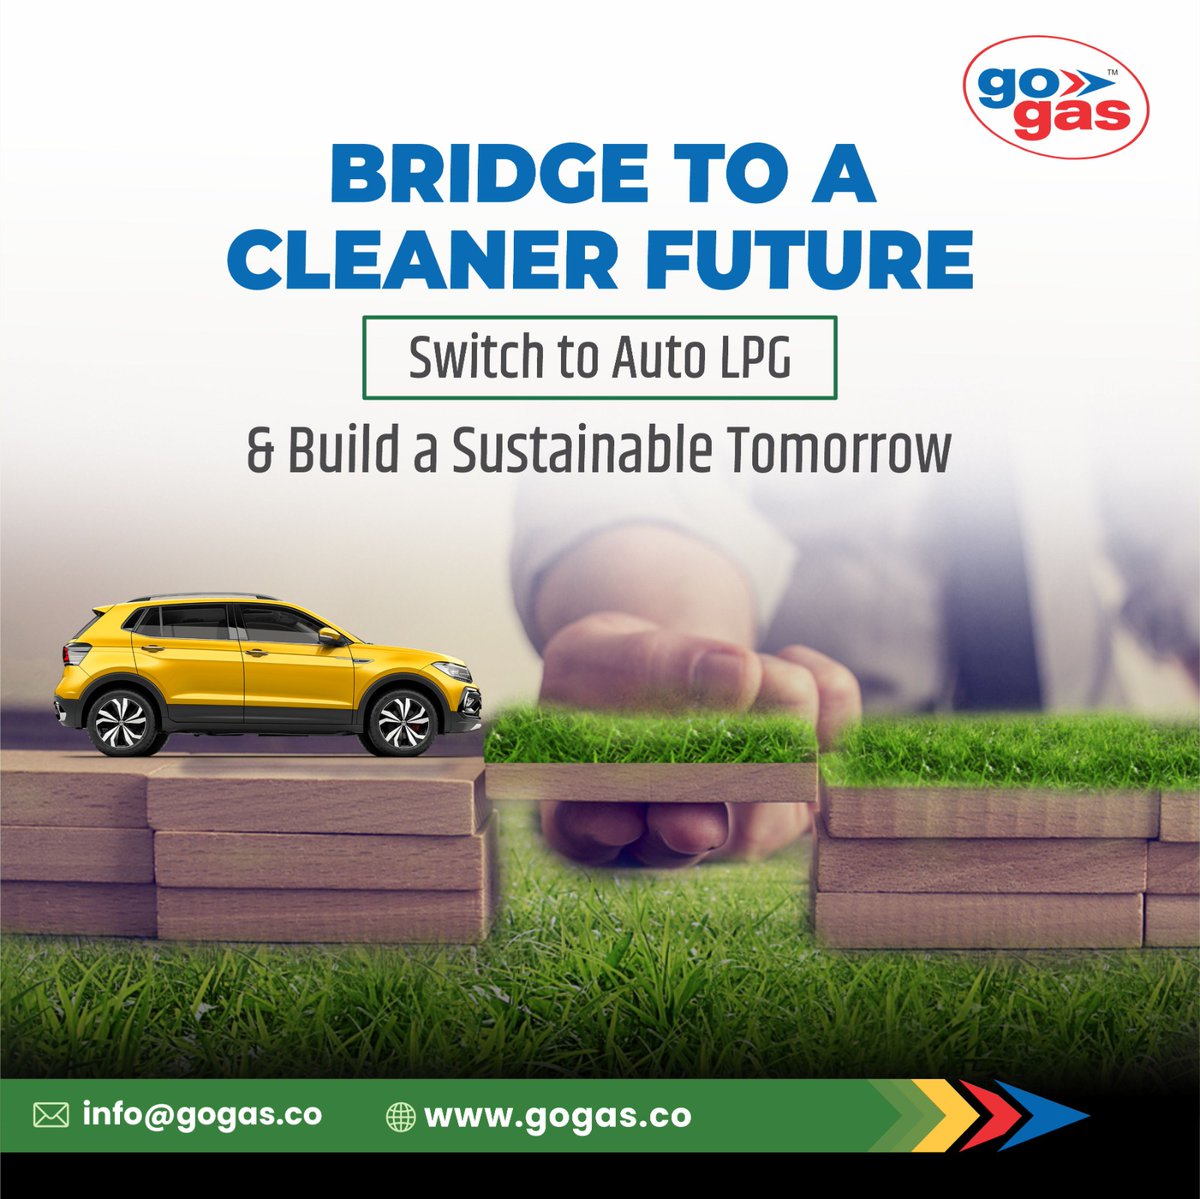 BRIDGE TO A CLEANER FUTURE
Switch to Auto LPG & Build a Sustainable Tomorrow
.
.
.
#CleanerFuture #SustainableLiving #AutoLPG #EnvironmentallyFriendly #GoGreen #CleanEnergy #GreenFuture #SustainableTomorrow #LPGConversion #BJPCandidateList #Bangalore